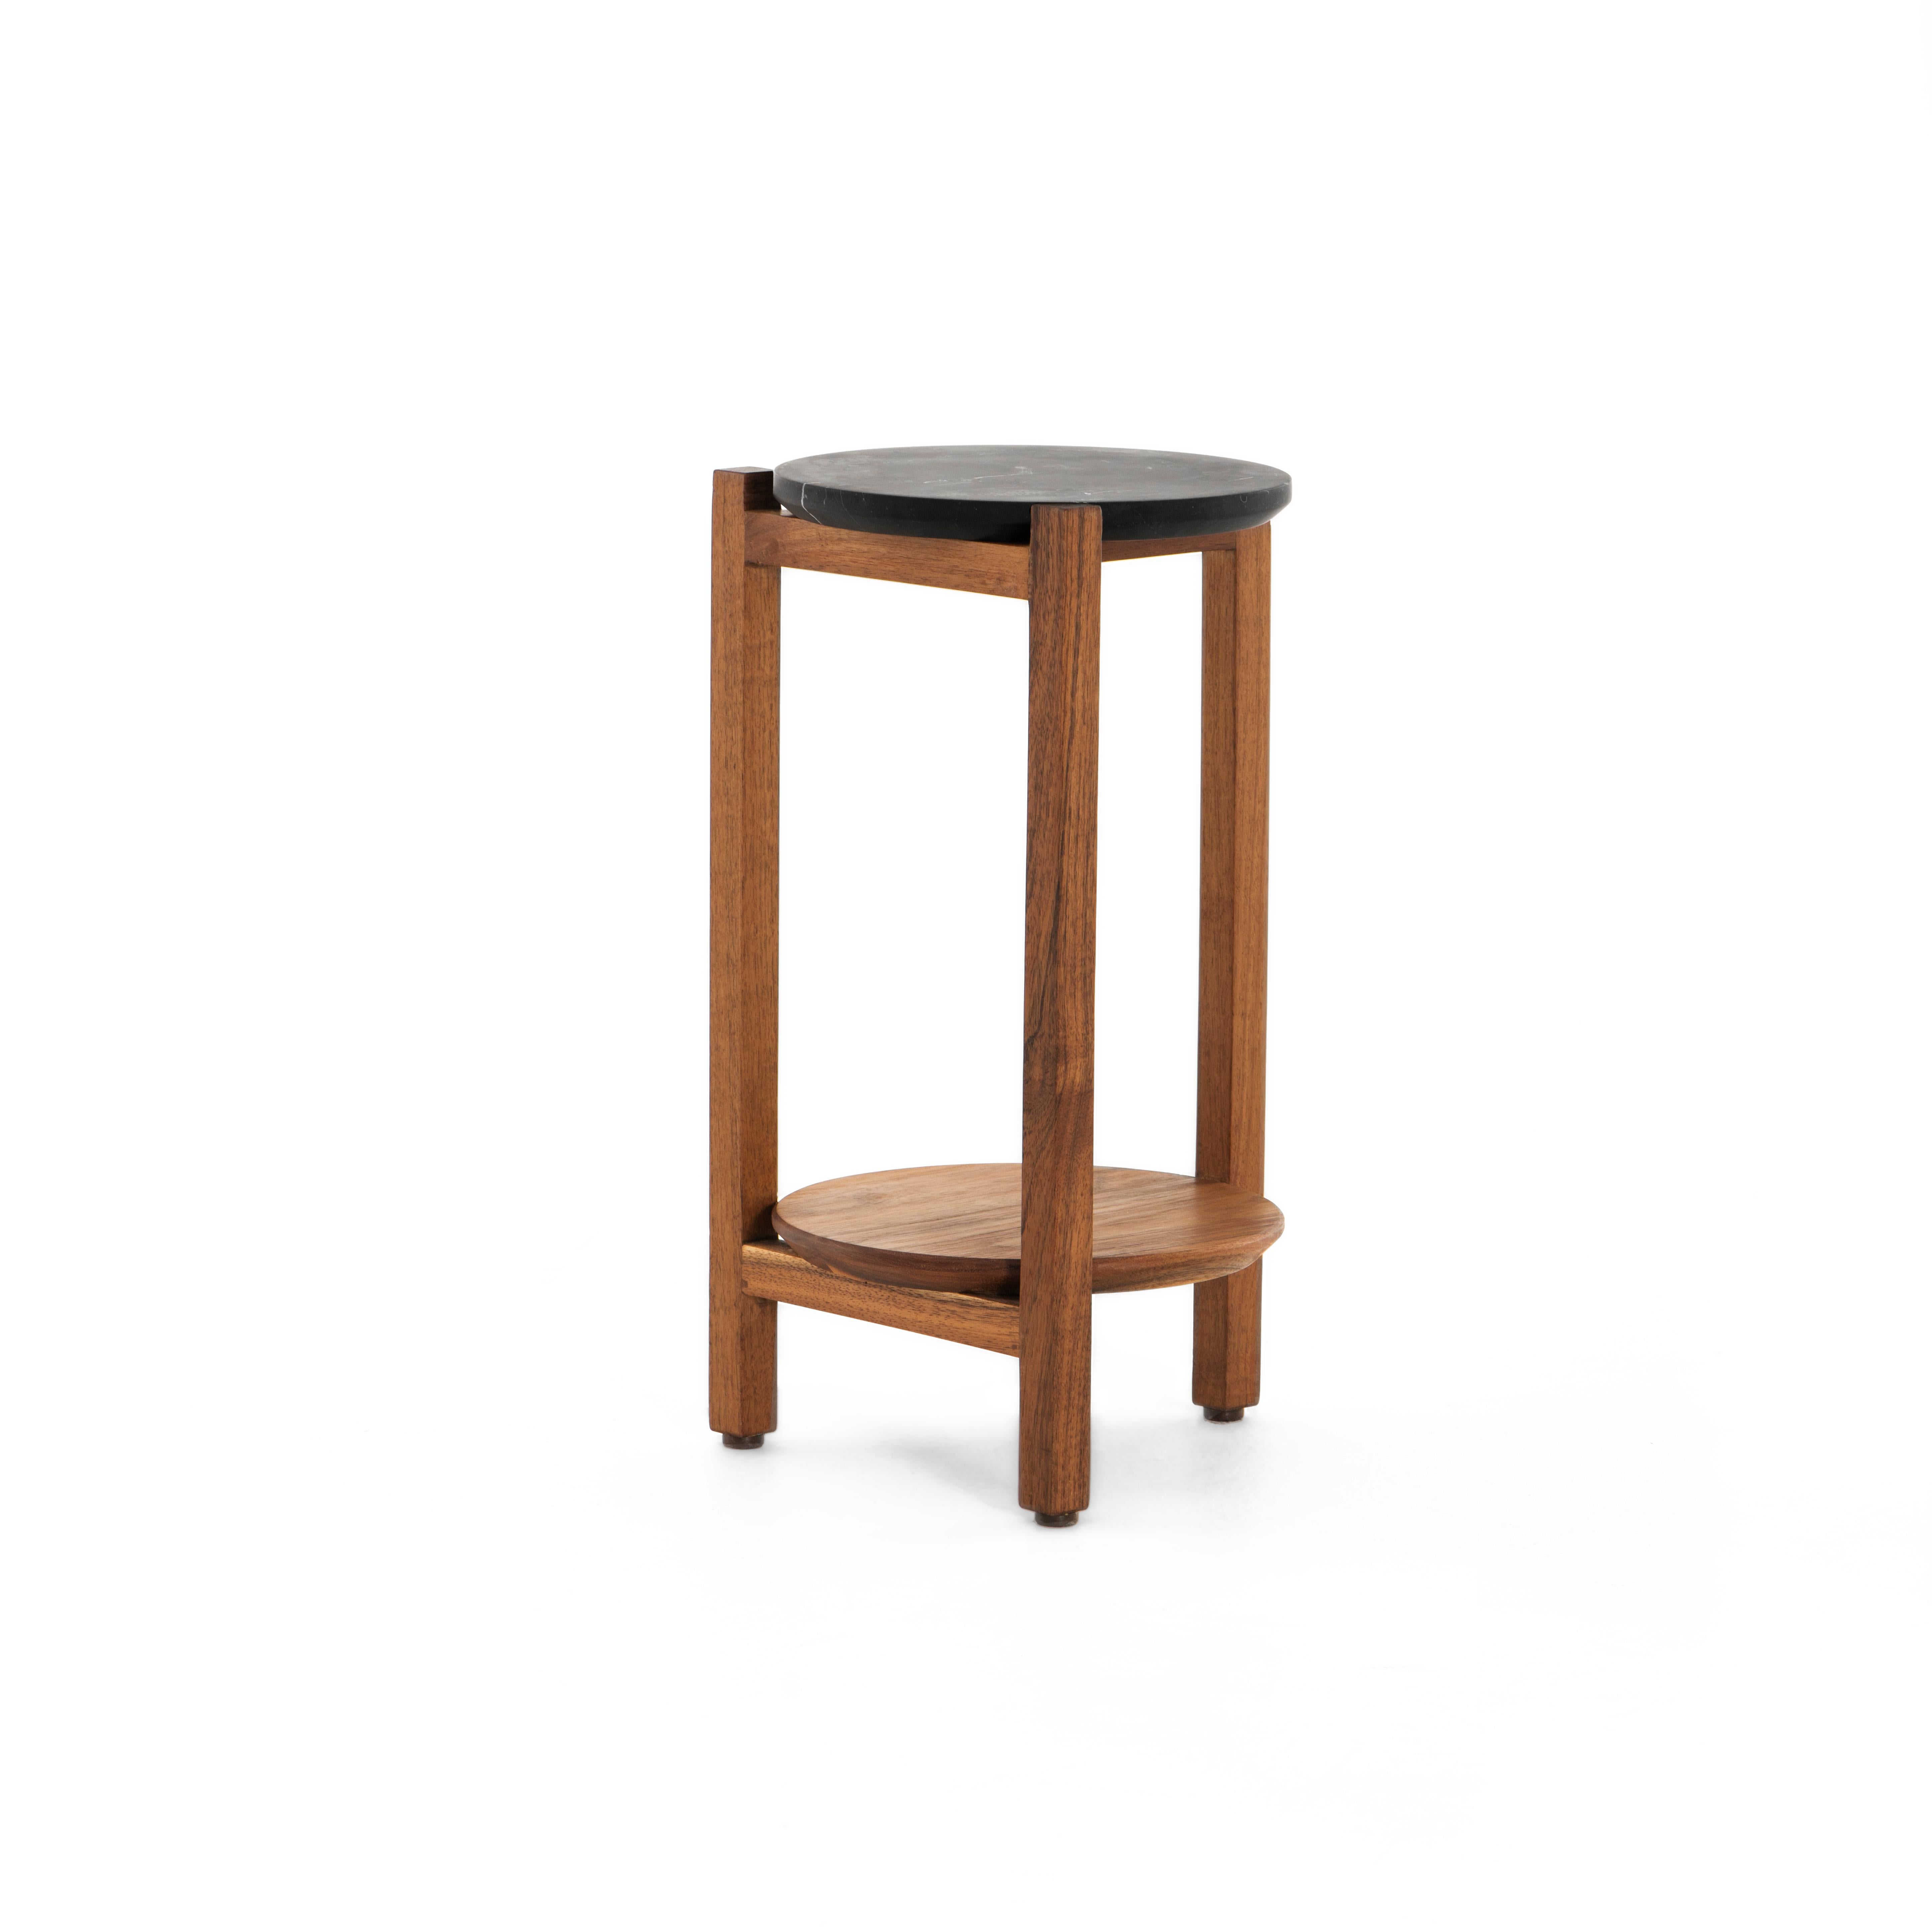 Polished Mesa Auxiliar B, Mexican Contemporary Side Table by Emiliano Molina for Cuchara For Sale